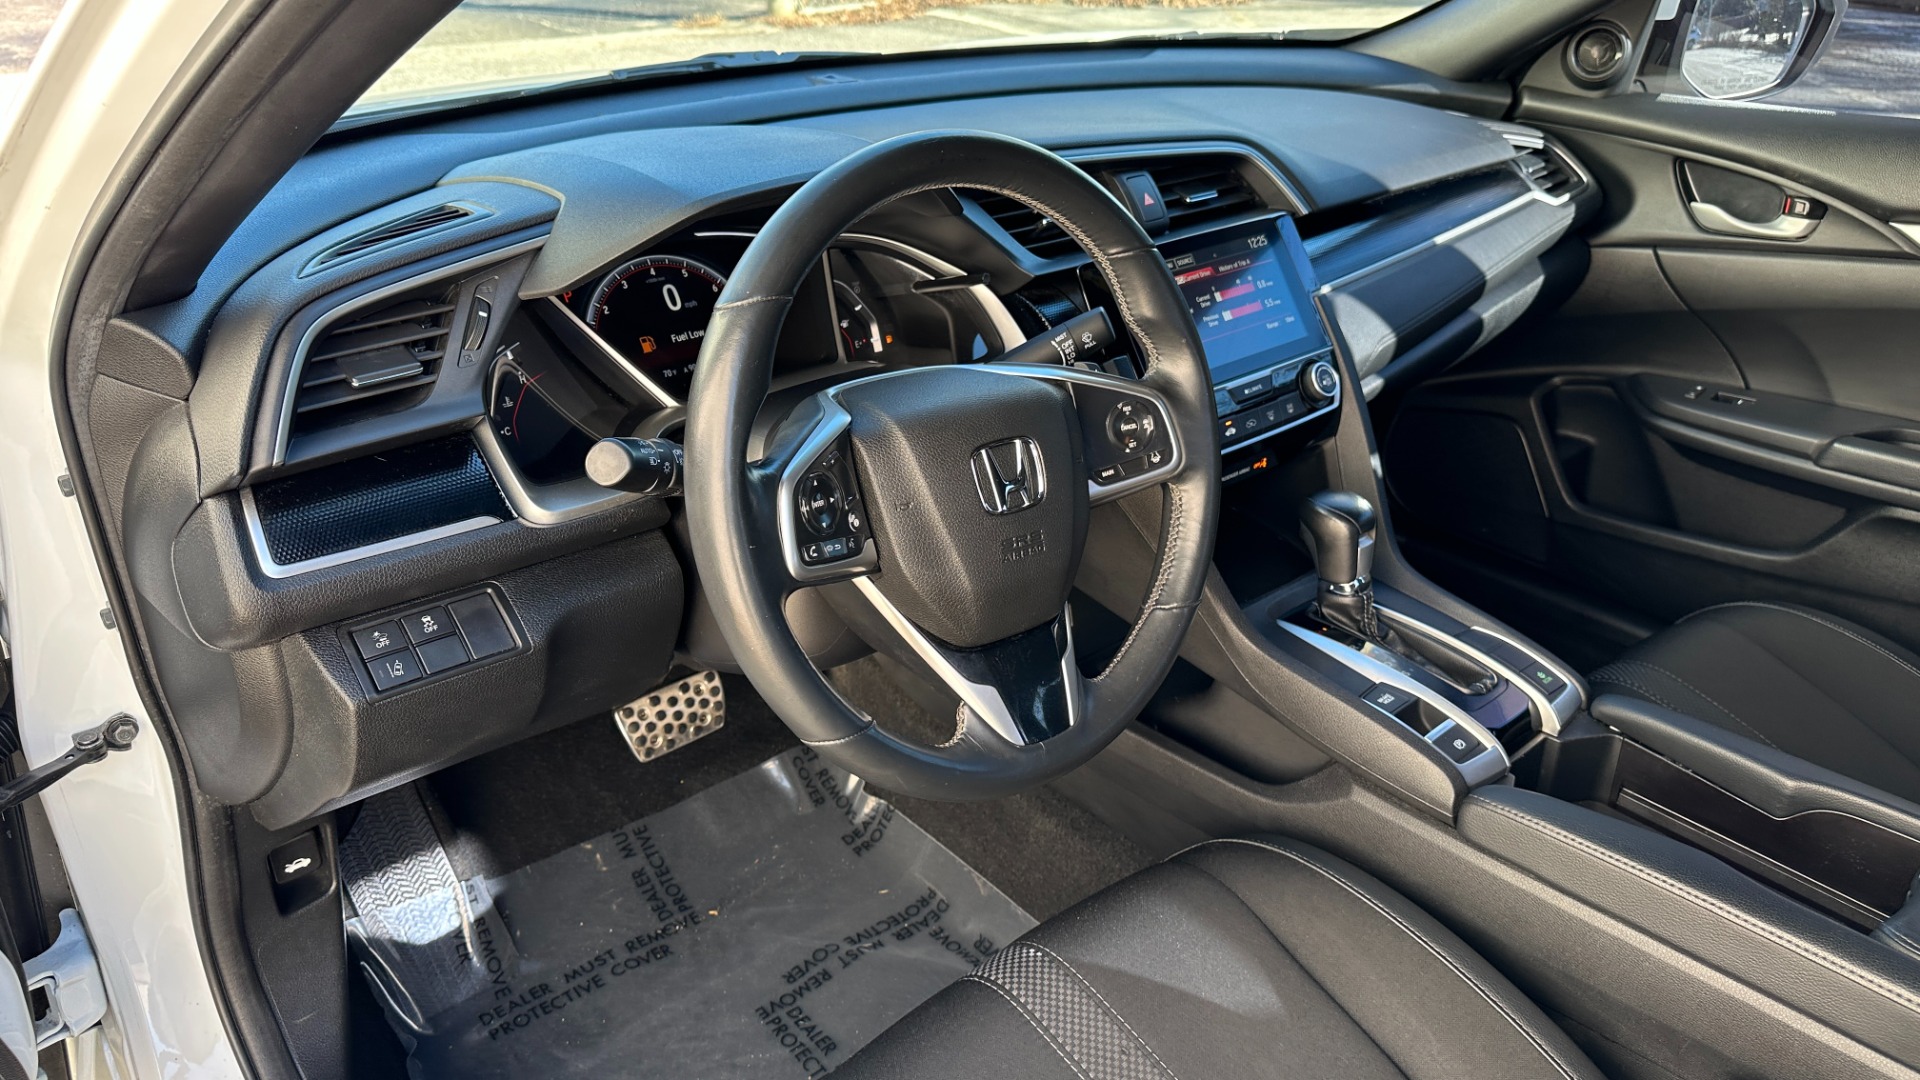 Used 2019 Honda Civic Sedan SPORT / CLOTH / REARVIEW / 4CYL for sale $21,995 at Formula Imports in Charlotte NC 28227 9